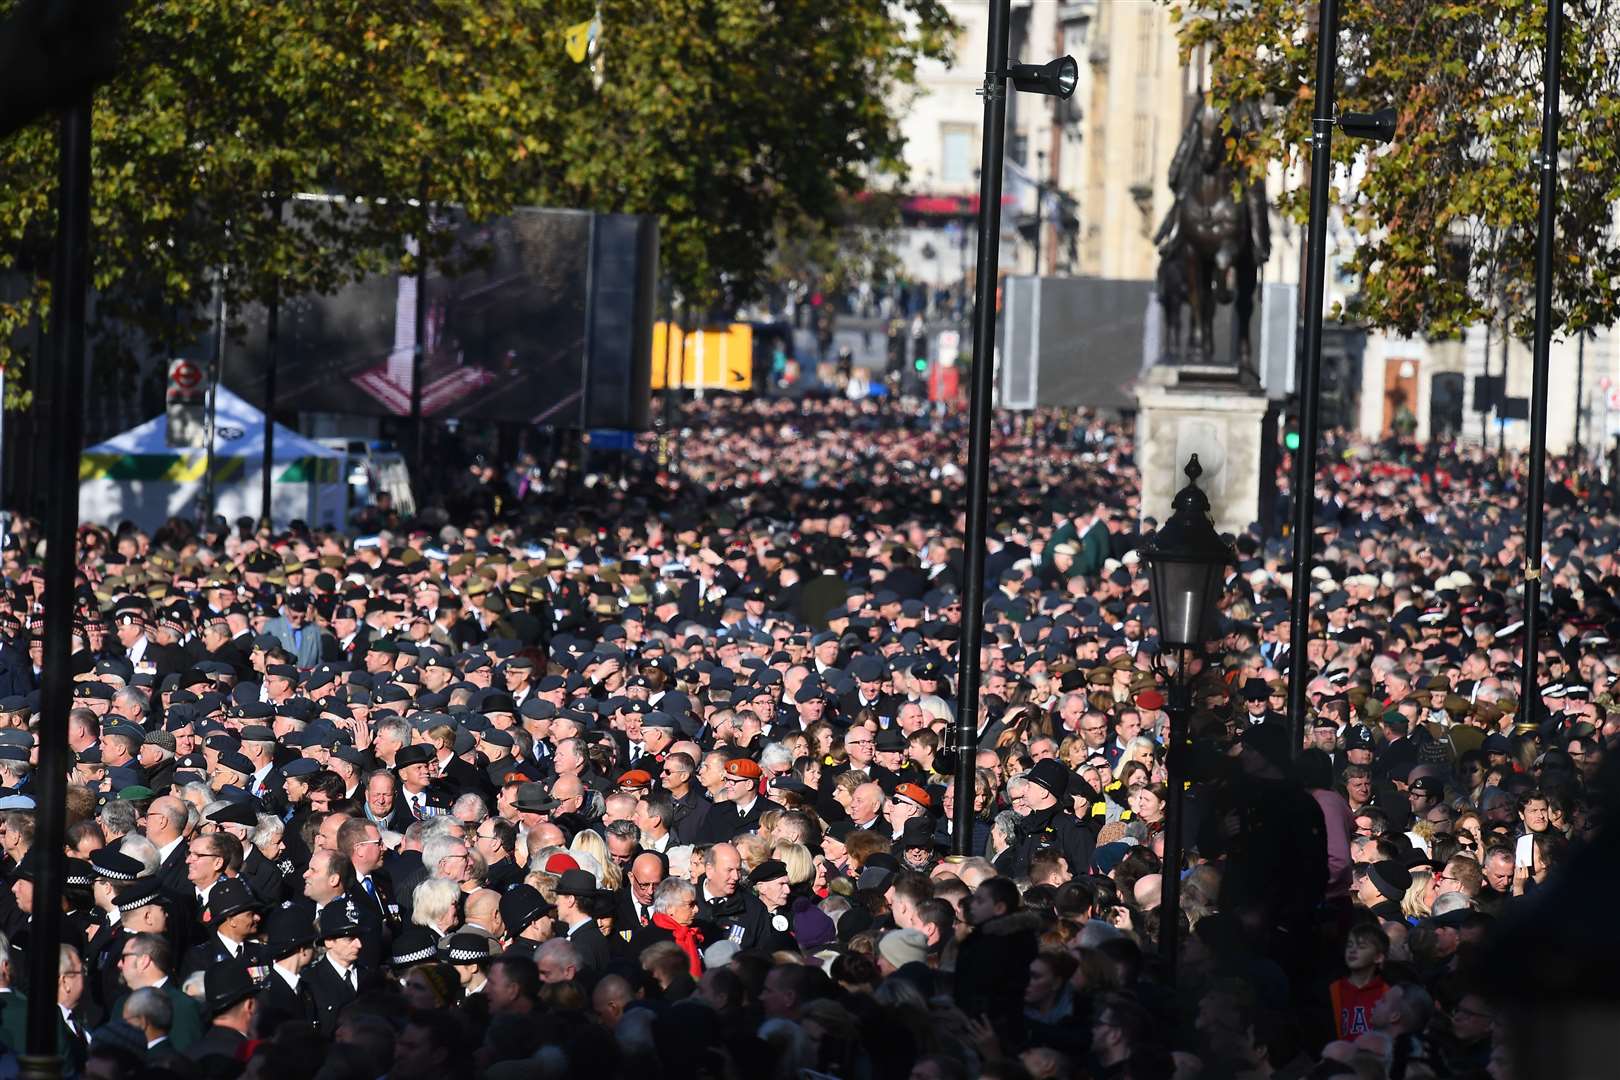 Veterans march past during the Remembrance Sunday service at the Cenotaph memorial in Whitehall in 2019 (Victoria Jones/PA)